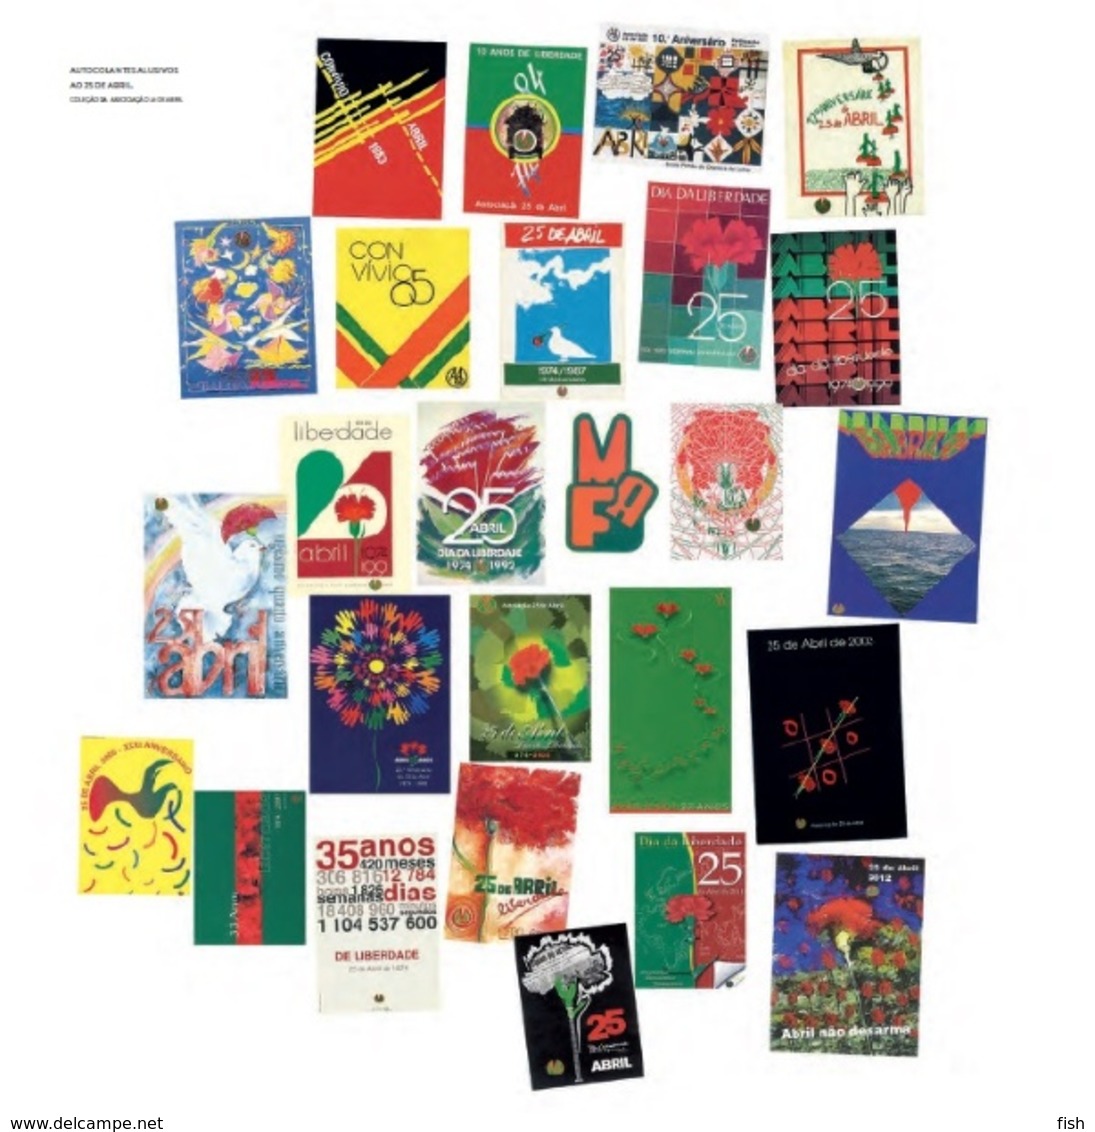 Portugal  ** & Thematic Book With Stamps, Book 25 April - 40 Years 2014 (5777) - Livre De L'année